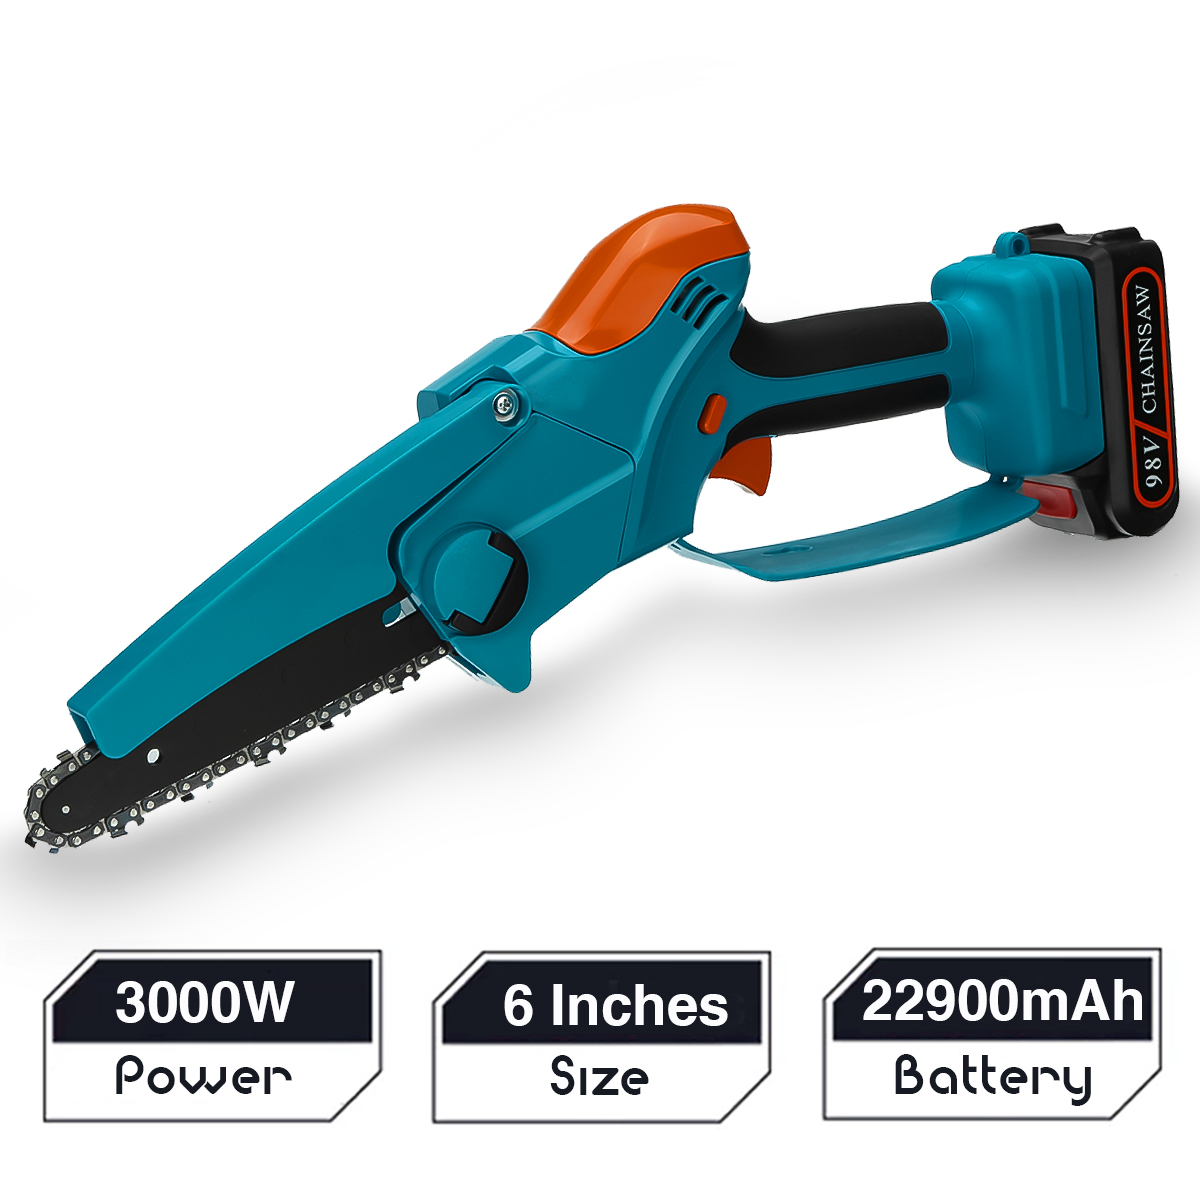 98VF-6-Inch-Portable-Electric-Saw-Pruning-Chain-Saw-Rechargeable-Woodworking-Power-Tools-Wood-Cutter-1917446-2